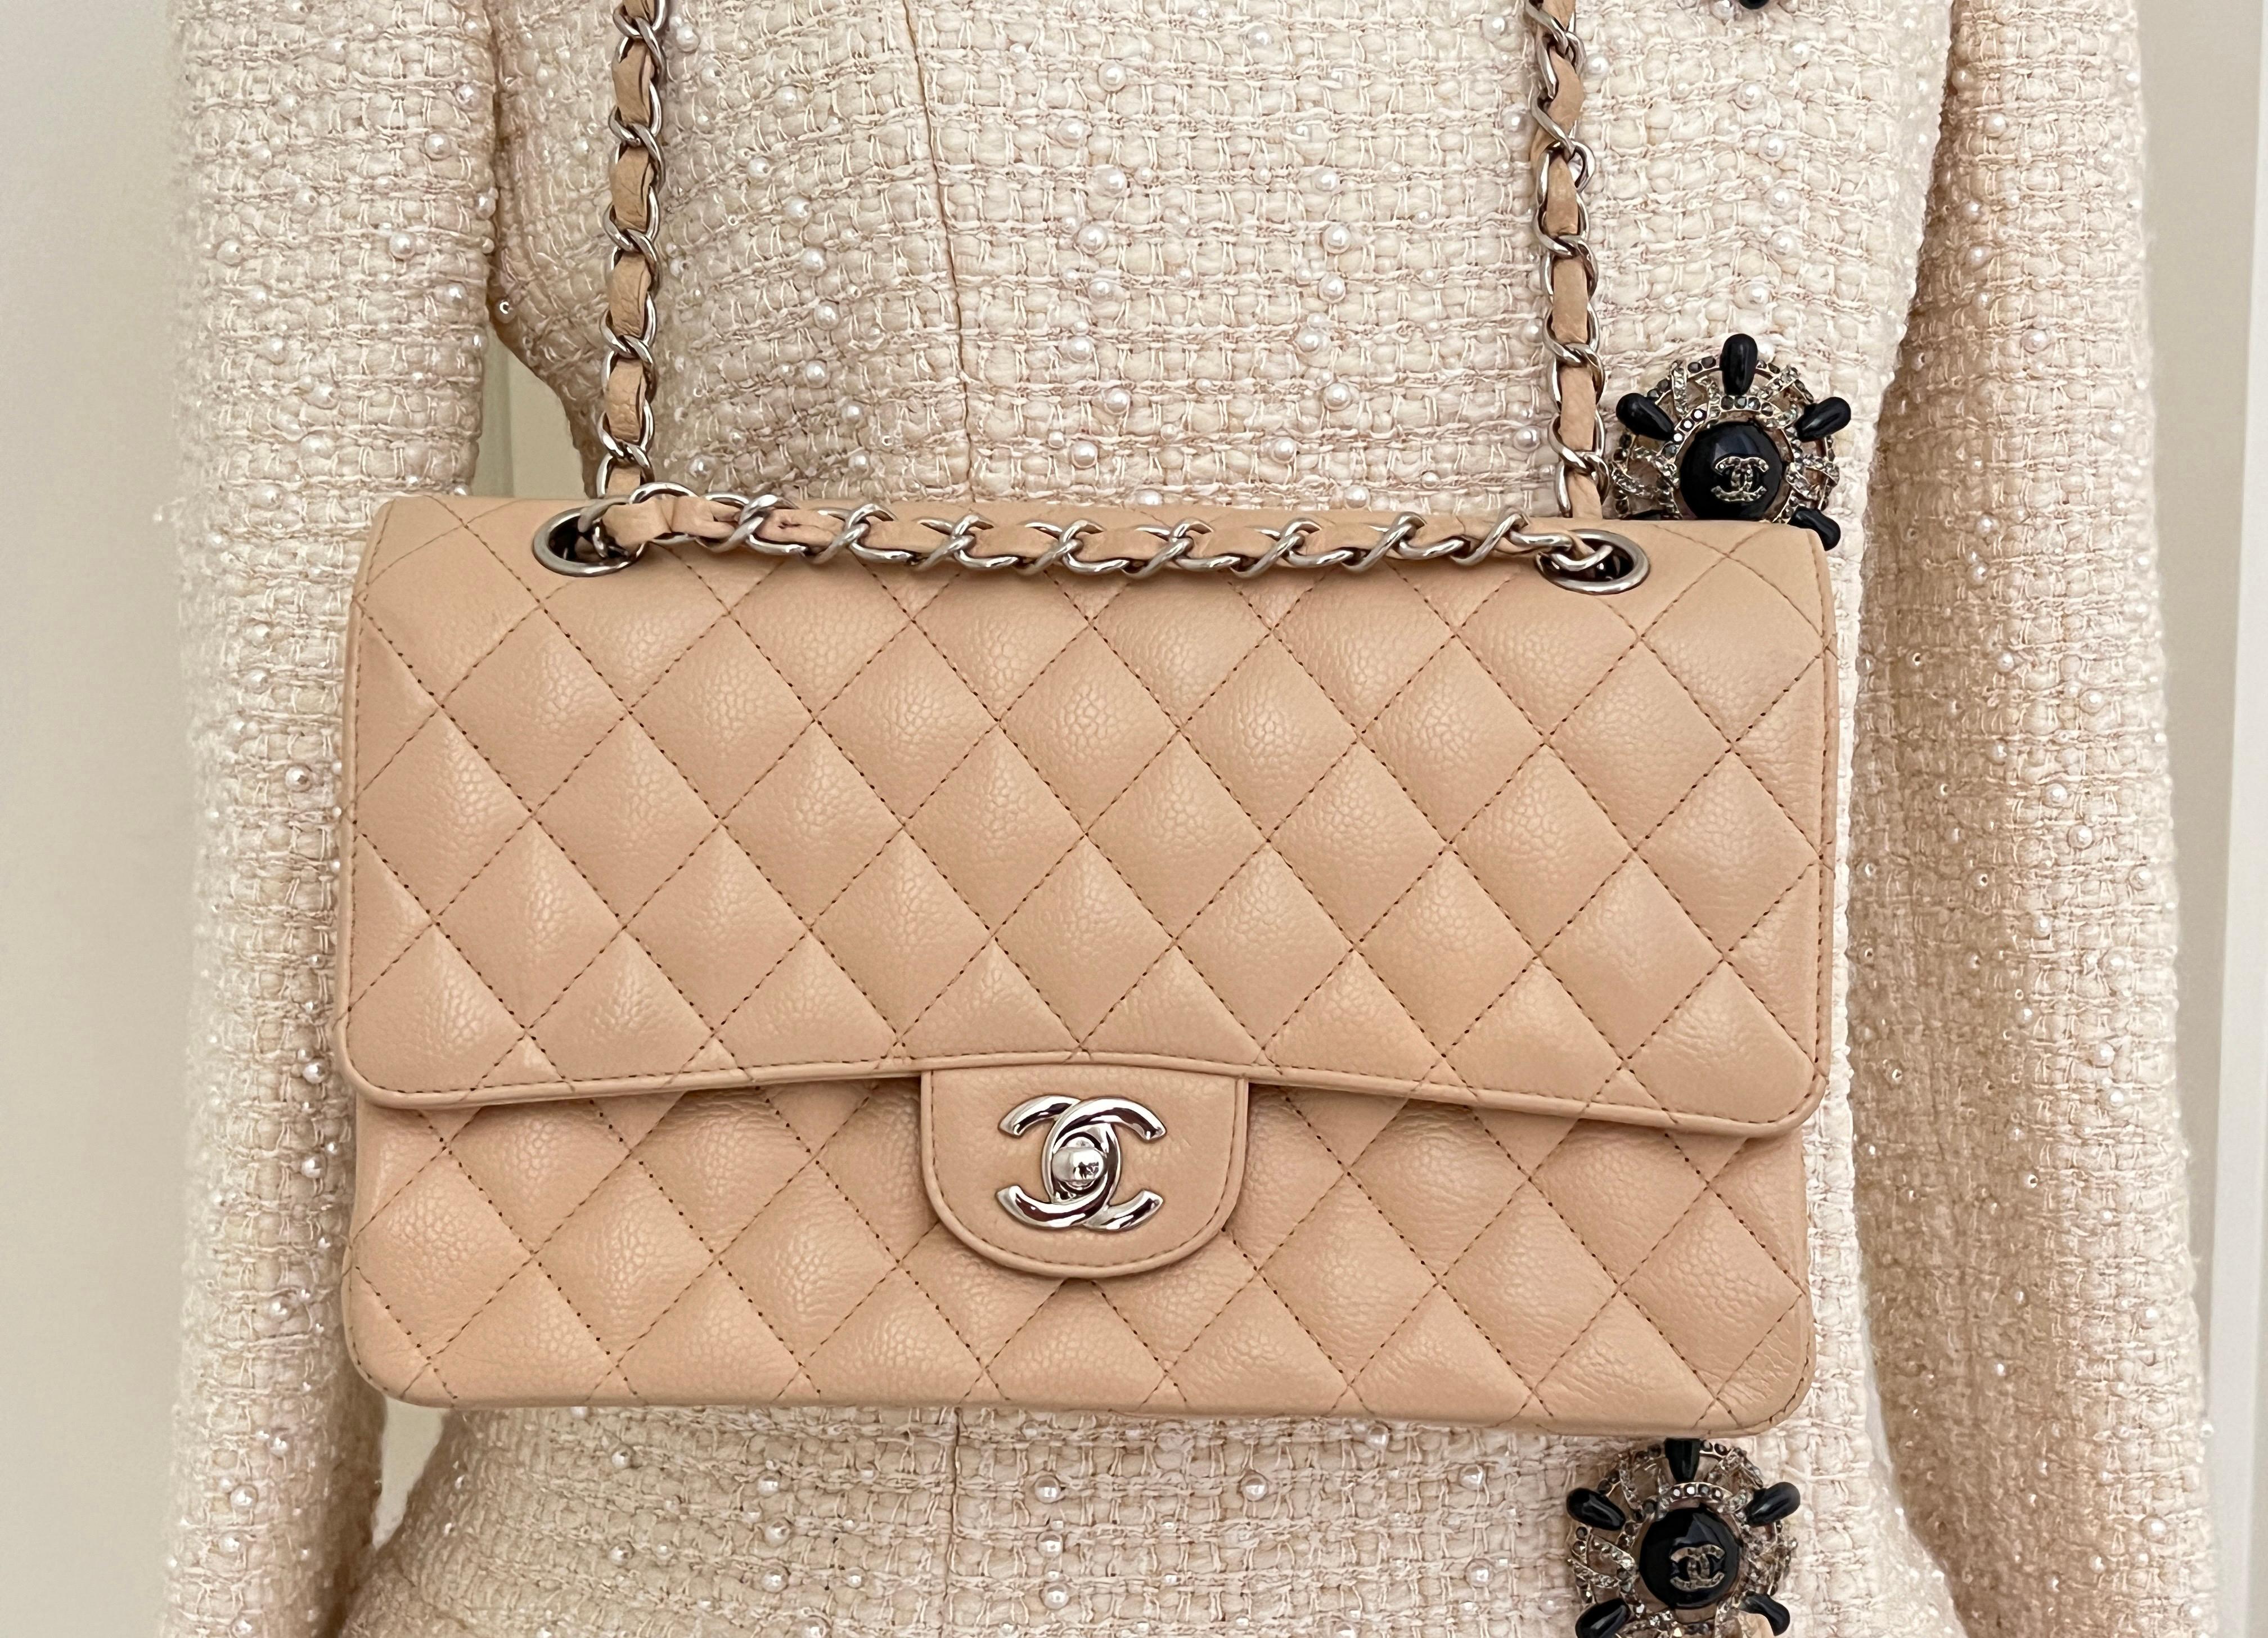 Stunning beauty Chanel CC Timeless Double Flap Bag in beige caviar leather with silver-tone hardware. 
Came out only once, condition is pristine, corners are pristine. Comes with dustbag. Size 25 cm wide, 16 cm high.
There is also a certificate of